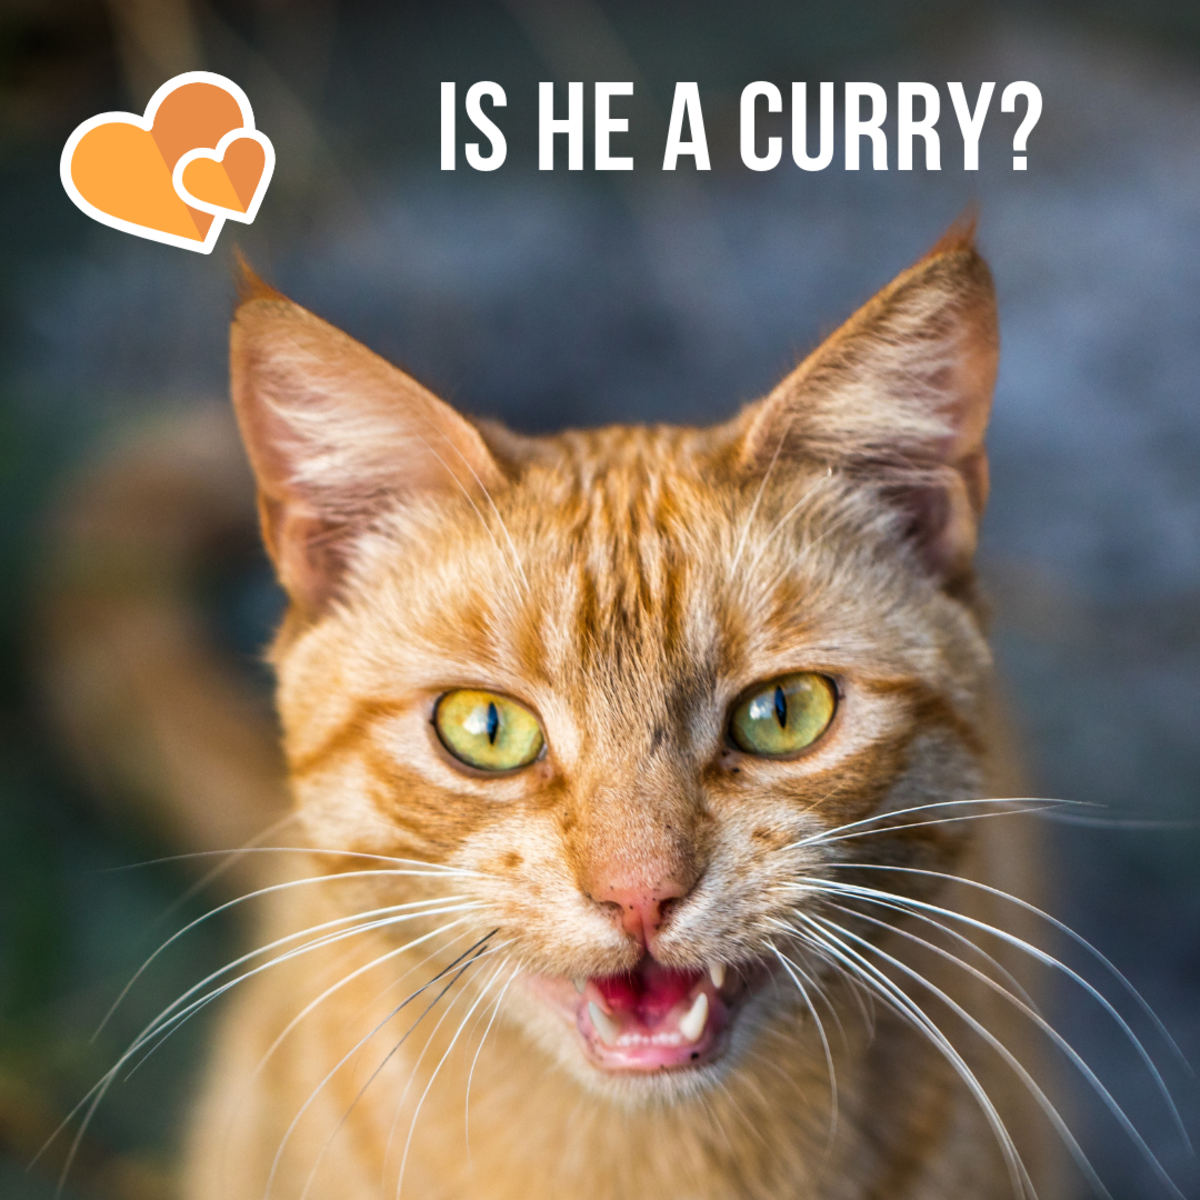 Maybe your spicy cat is a Curry.